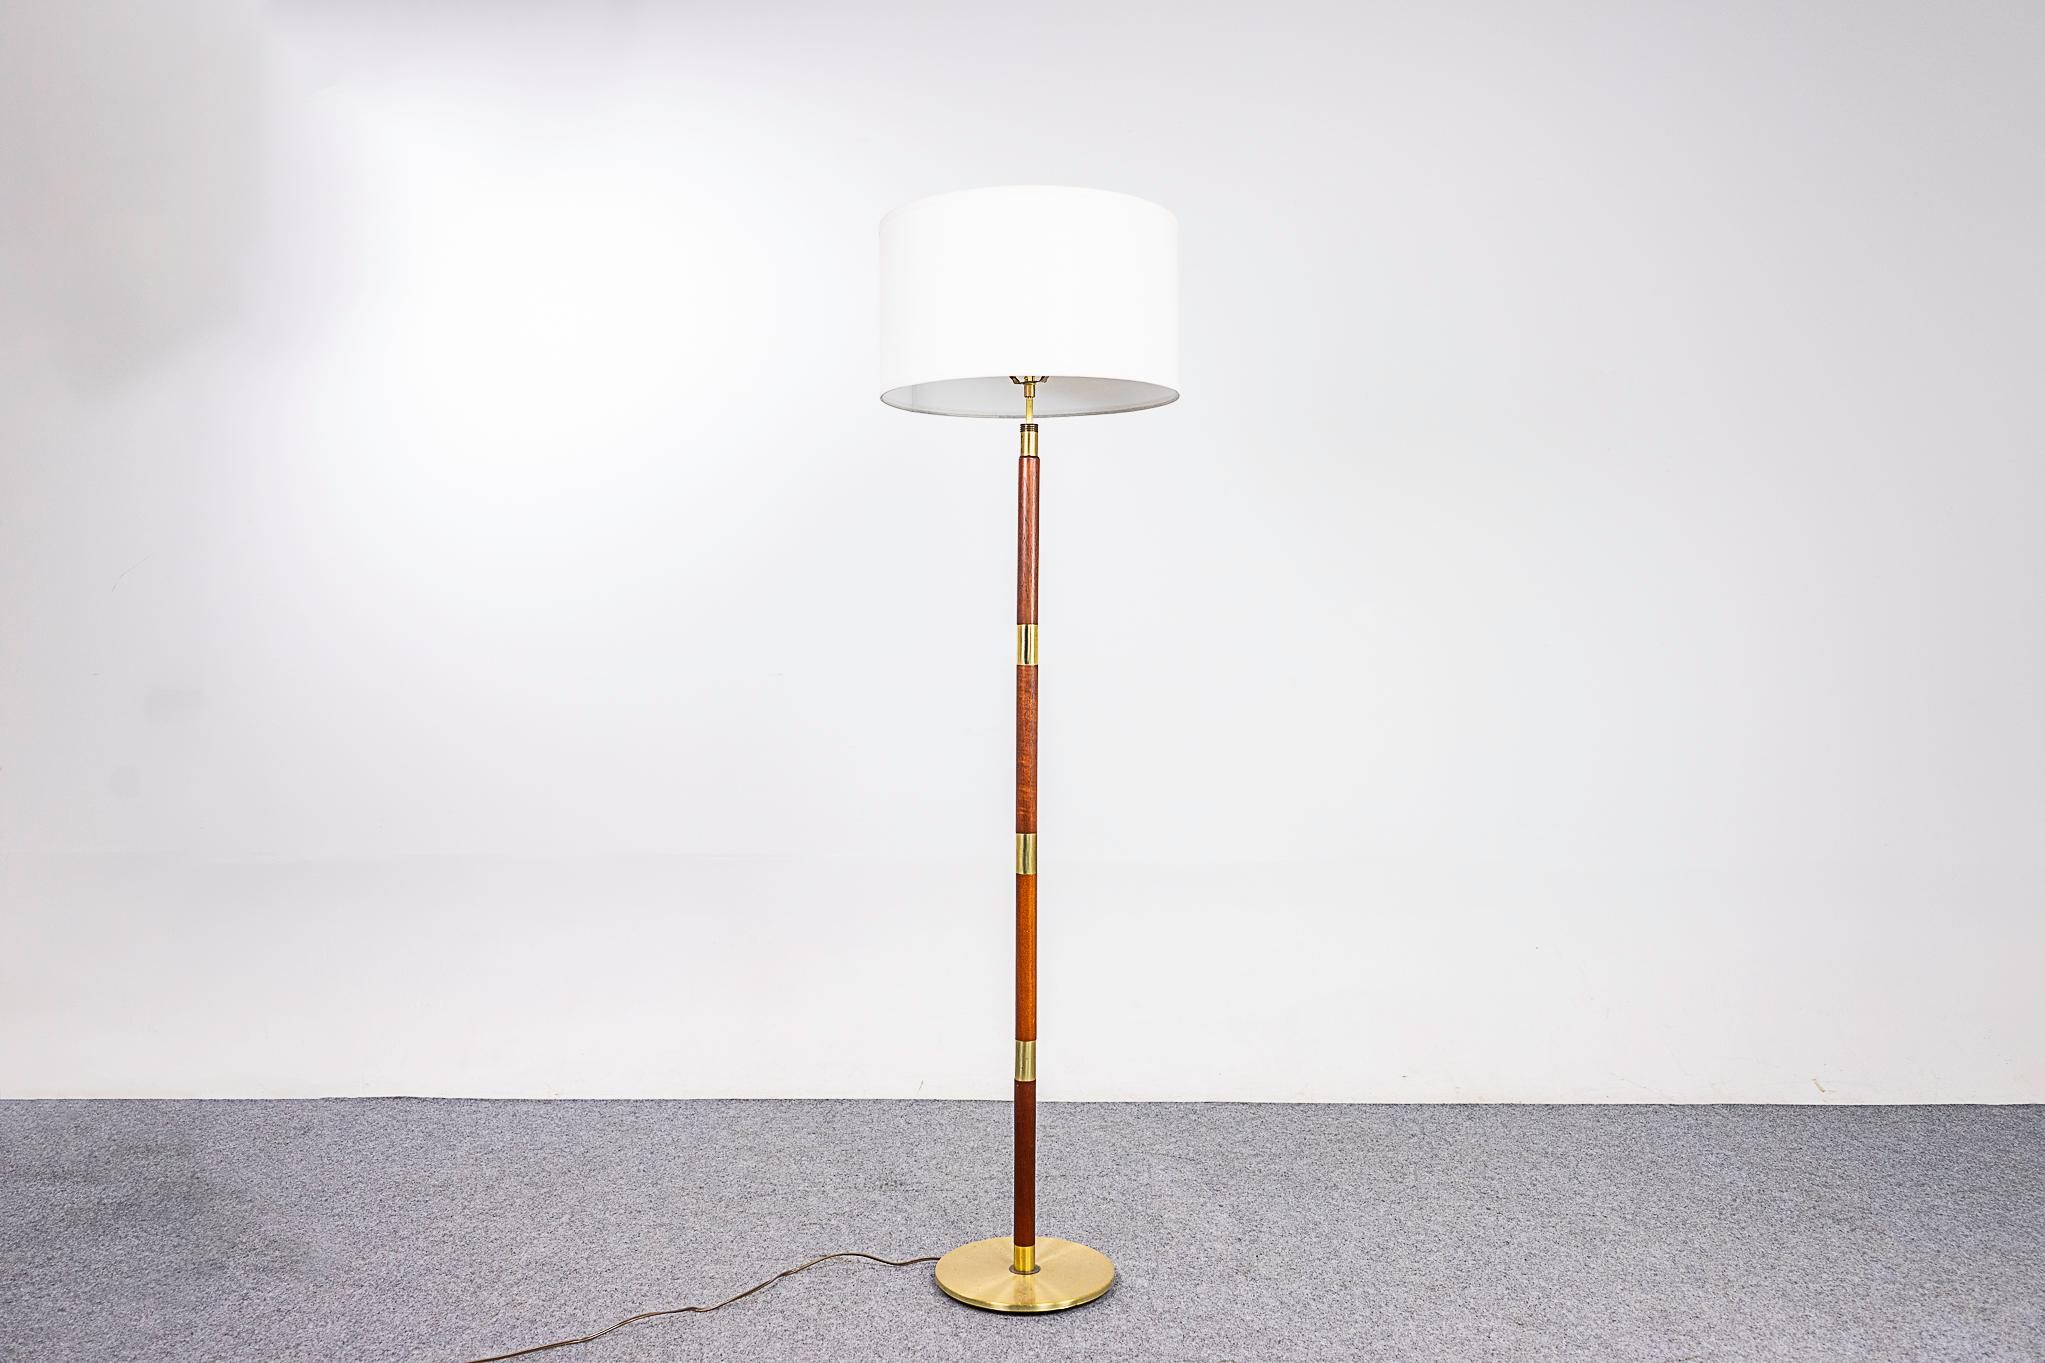 Teak & metal Danish floor lamp, circa 1960's. Beautiful solid teak construction with metal accents New quality custom shade. Re-wired for 110V, tri-light socket allows for 3 brightness settings. Neck adjusts to set your desired height, 57' to